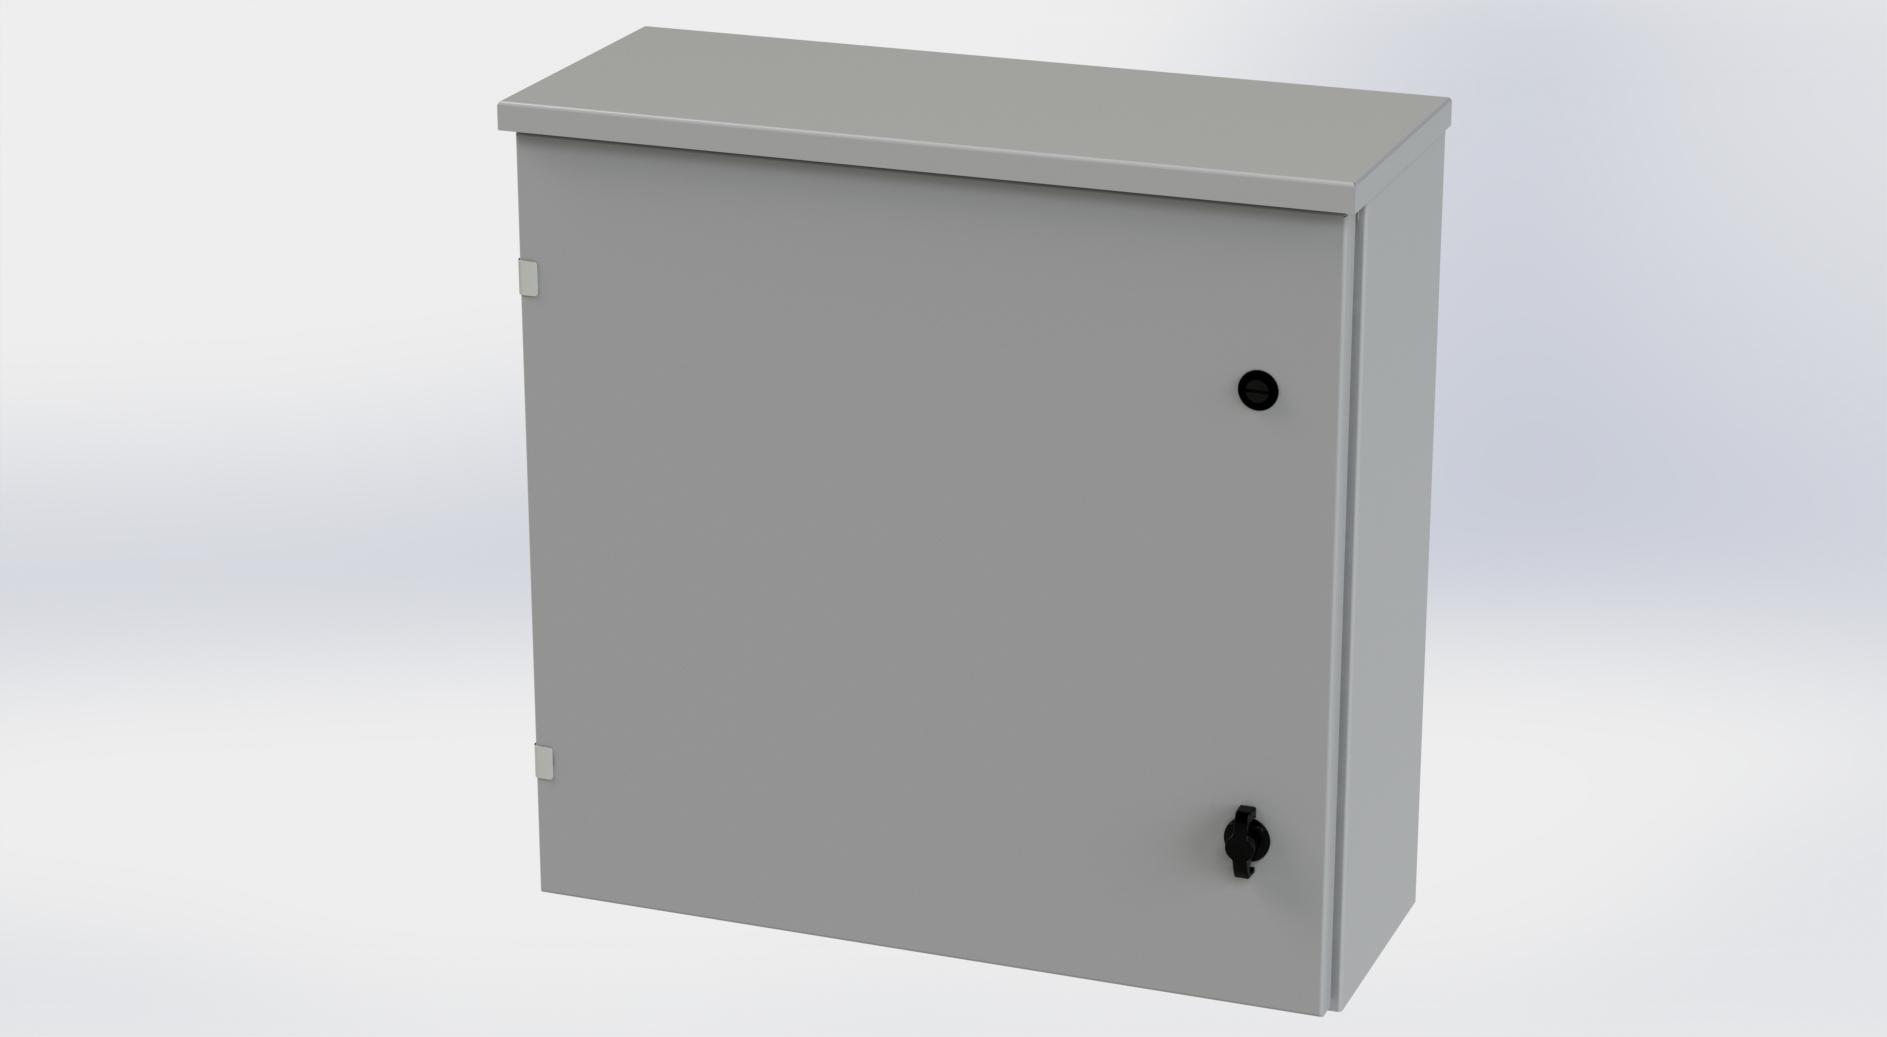 Saginaw Control SCE-24R2408LP Type-3R Hinged Cover Enclosure, Height:24.00", Width:24.00", Depth:8.00", ANSI-61 gray powder coating inside and out. Optional sub-panels are powder coated white.